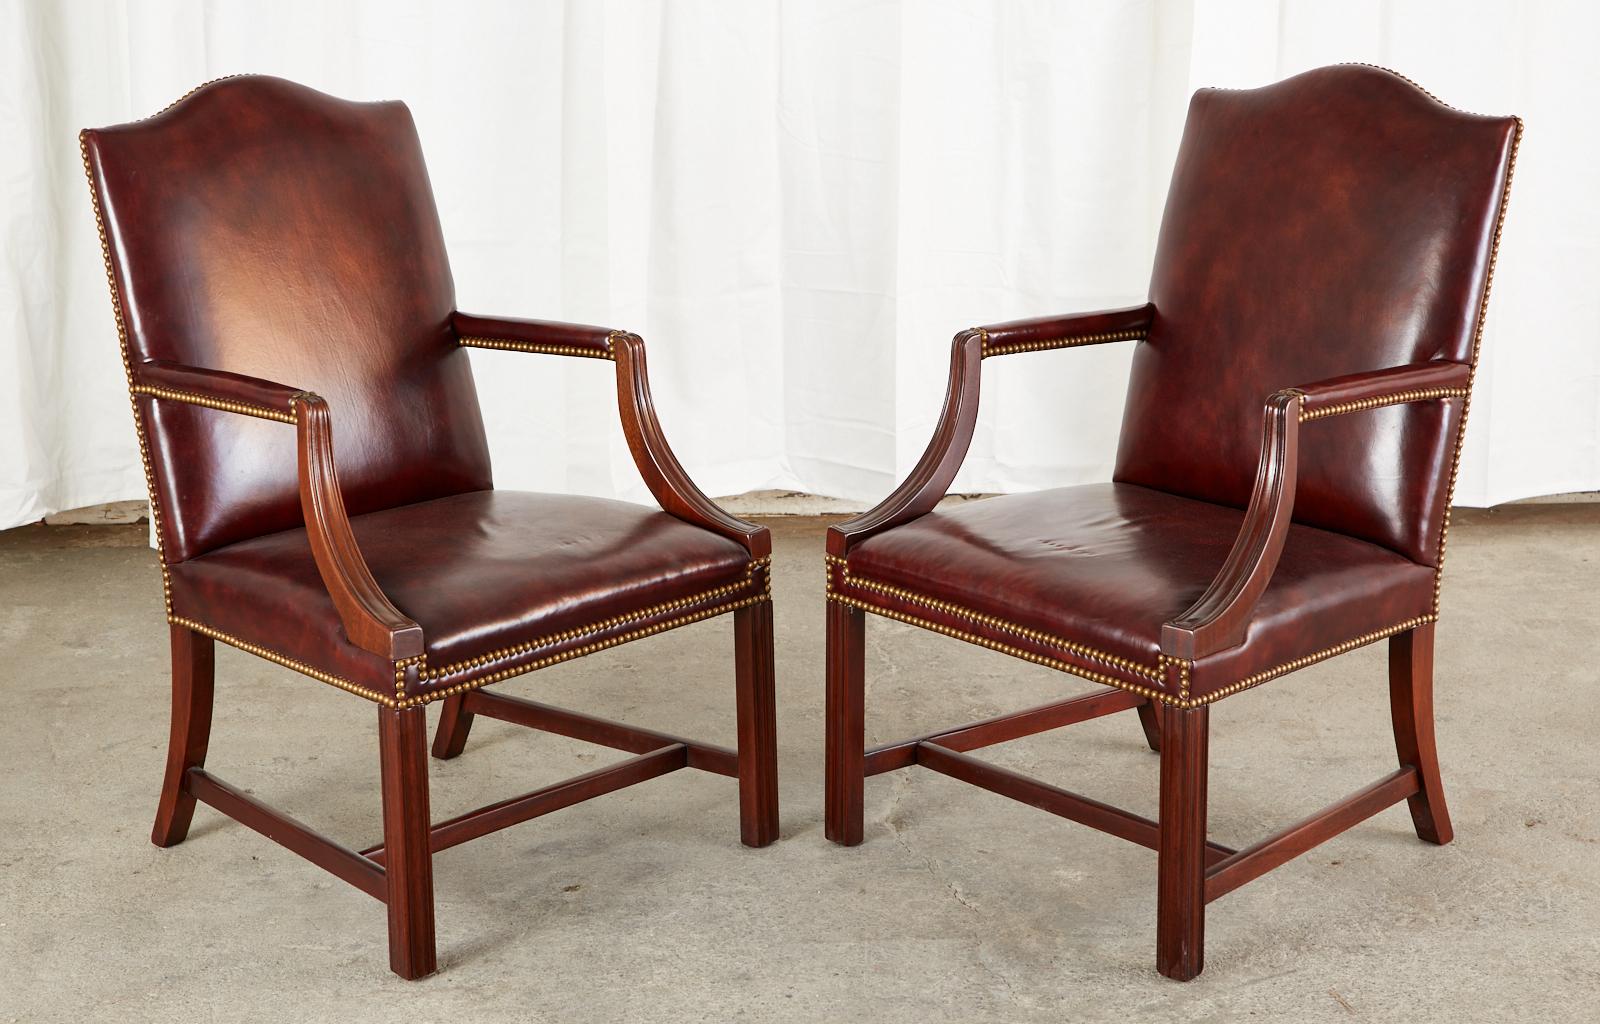 Handsome set of four mahogany and leather library armchairs made in the Georgian Gainsborough style. The stately chairs feature a distinctive mahogany frame with gracefully curved arms supporting padded armrests. The seat has a classic flatback with